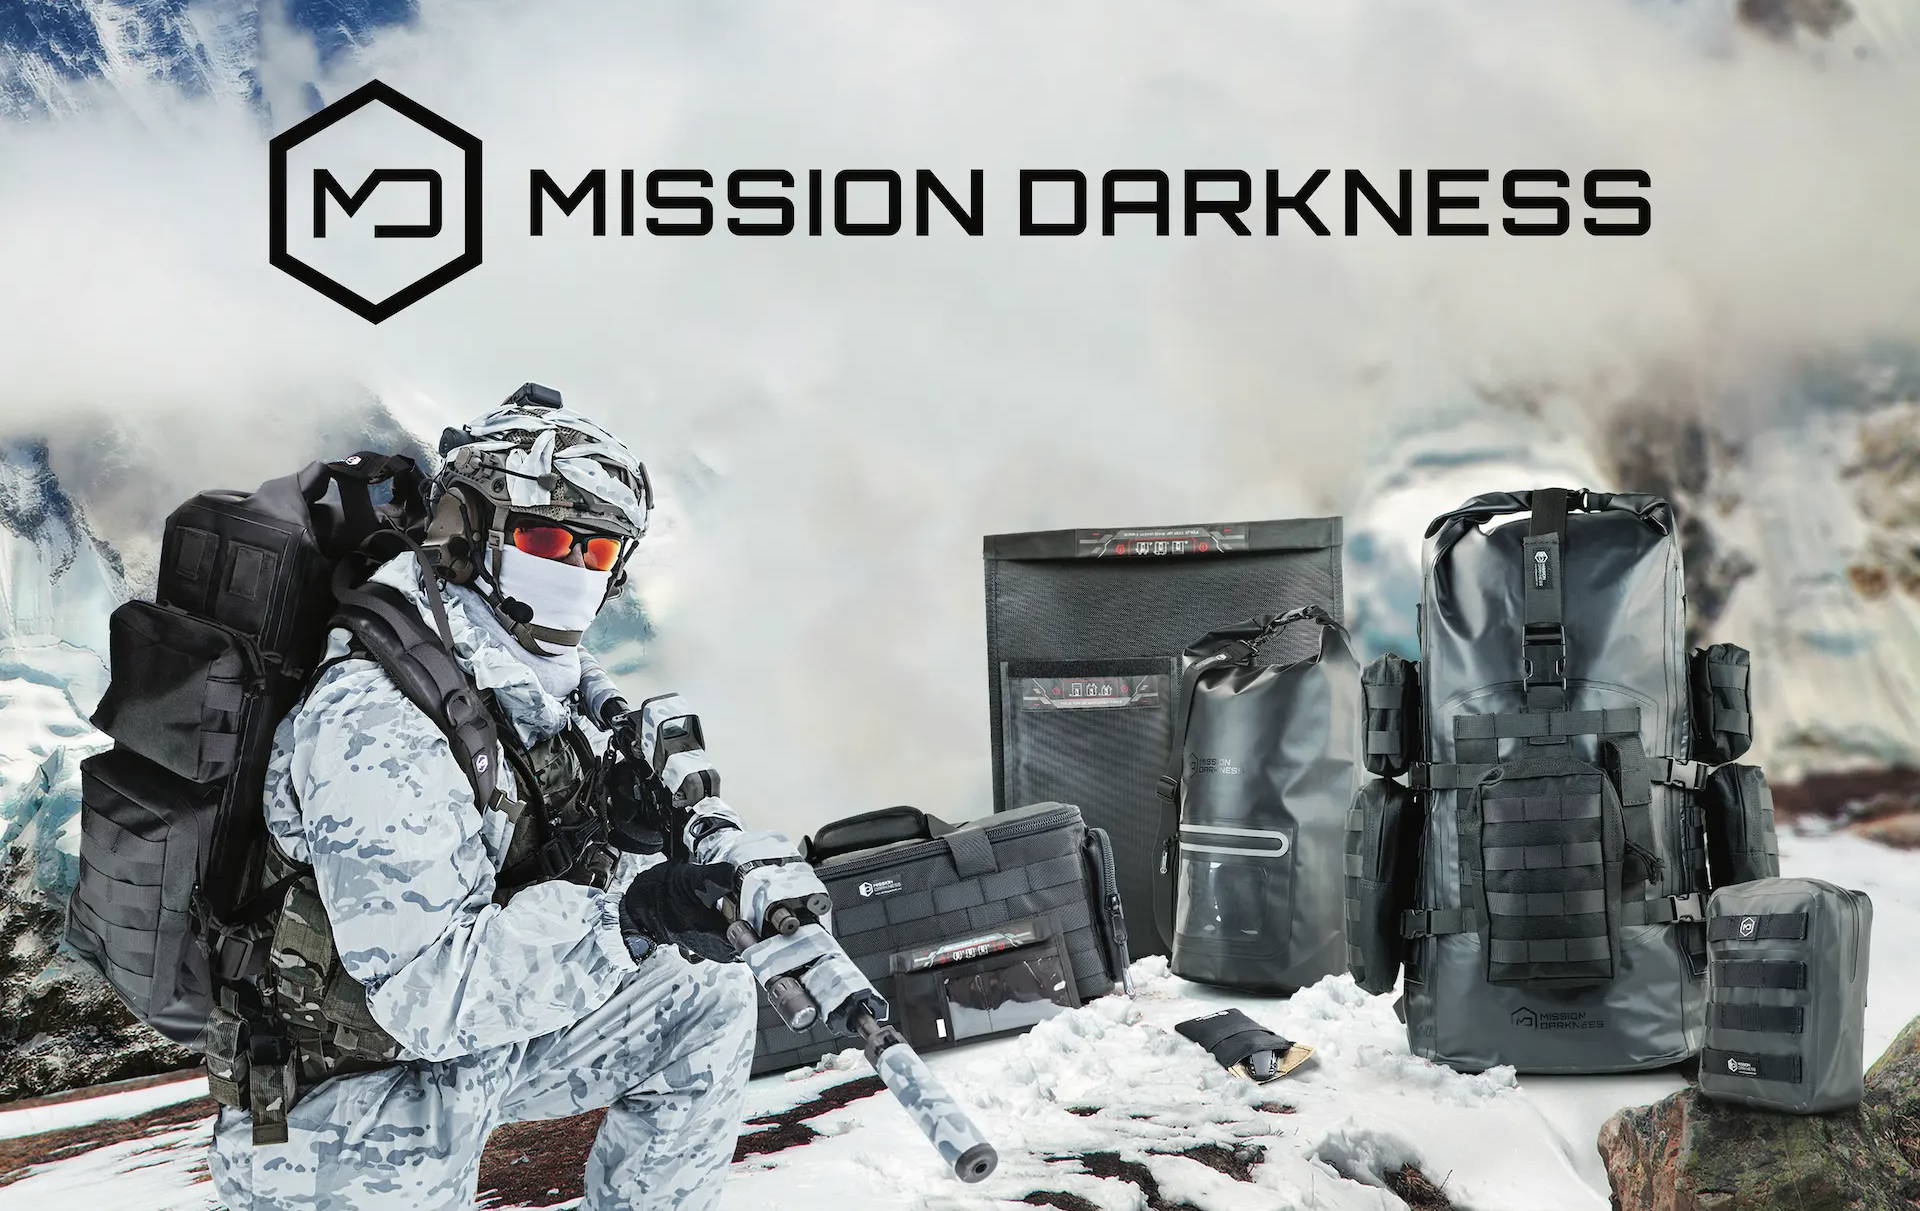 mission darkness faraday bags block radio frequency signals